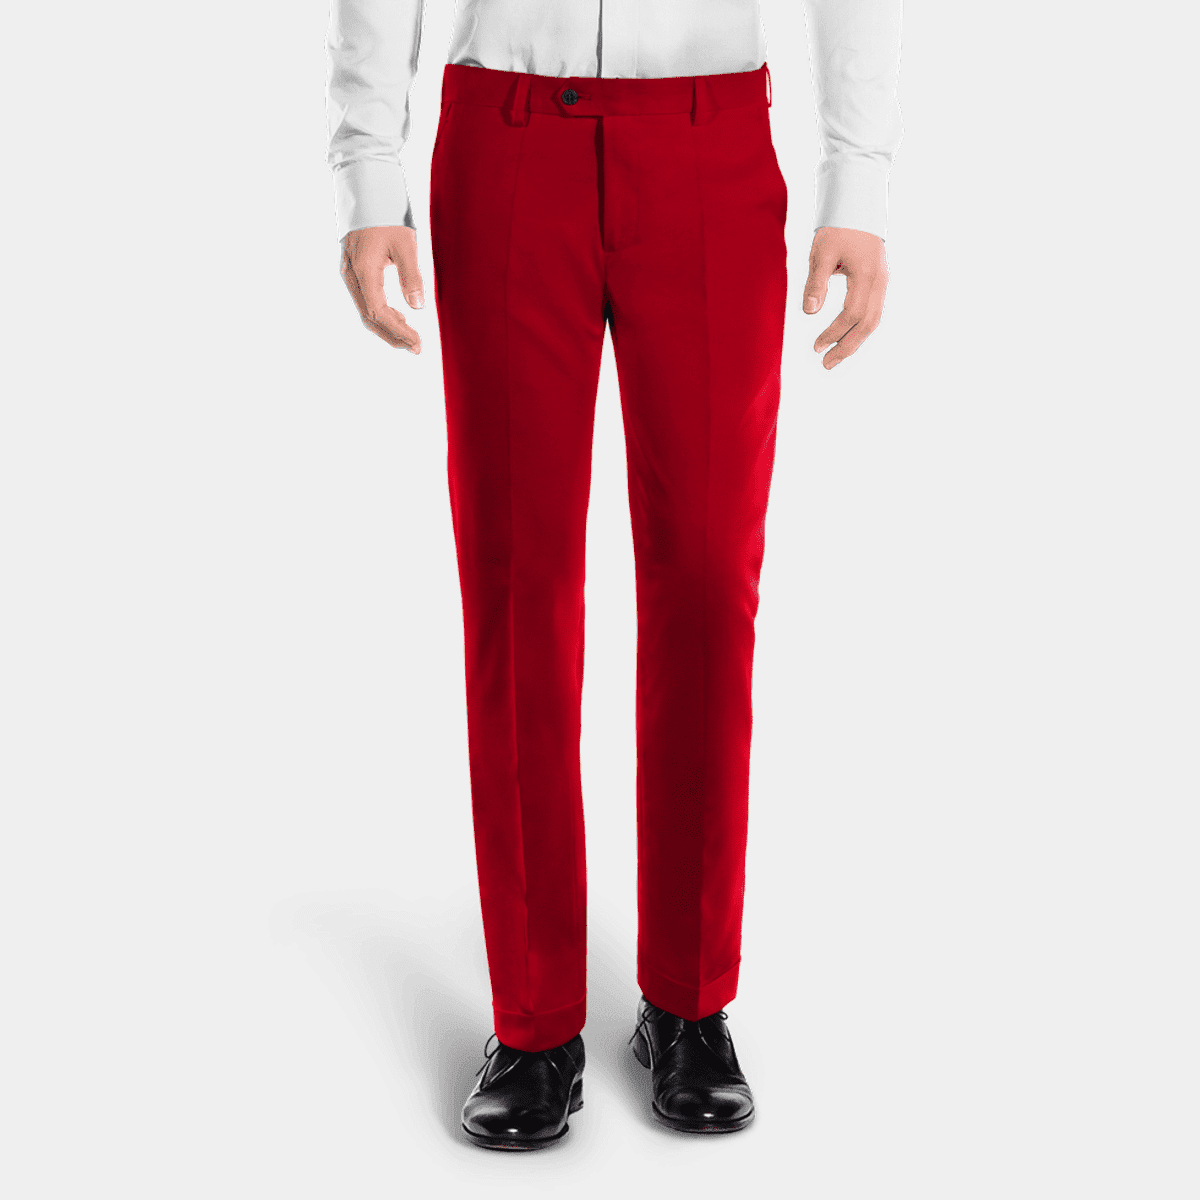 A Maroon Red peak lapel one button, rope detailing suit & pant trousers. |  Red dress pants, Red prom suit, Turtleneck outfit men